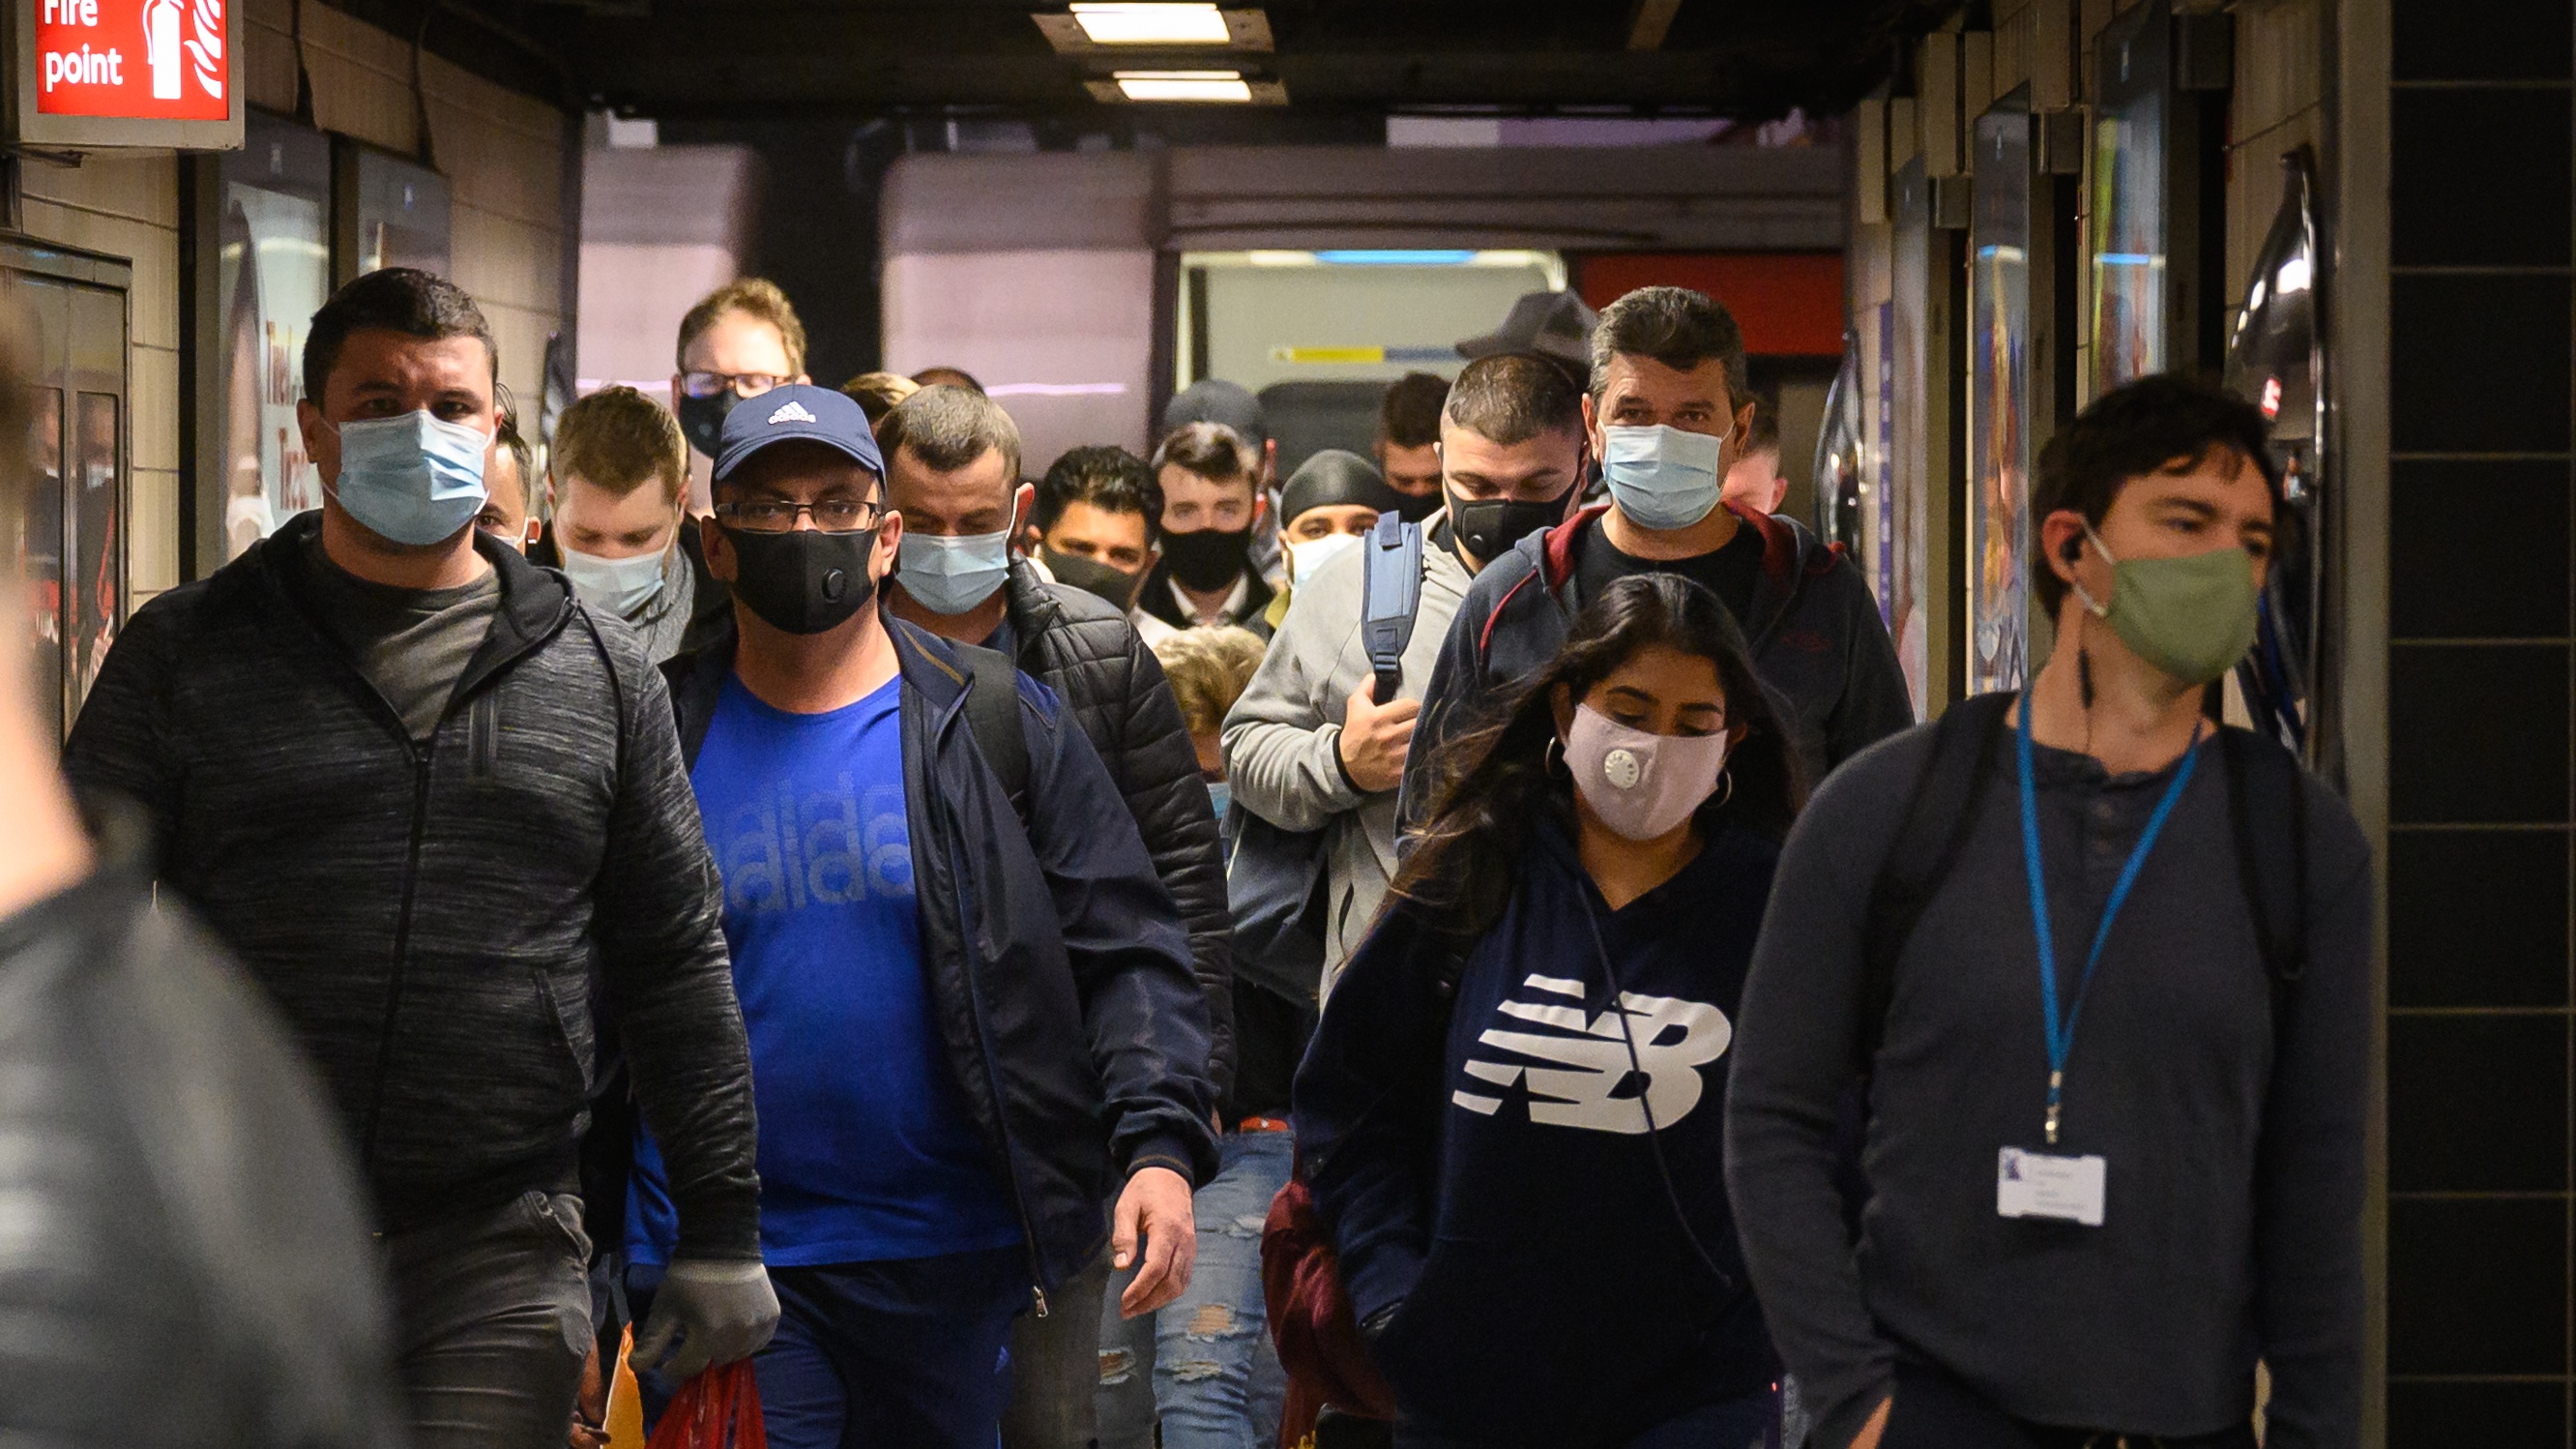 Commuters wear face masks as they pass through Vauxhall underground station.